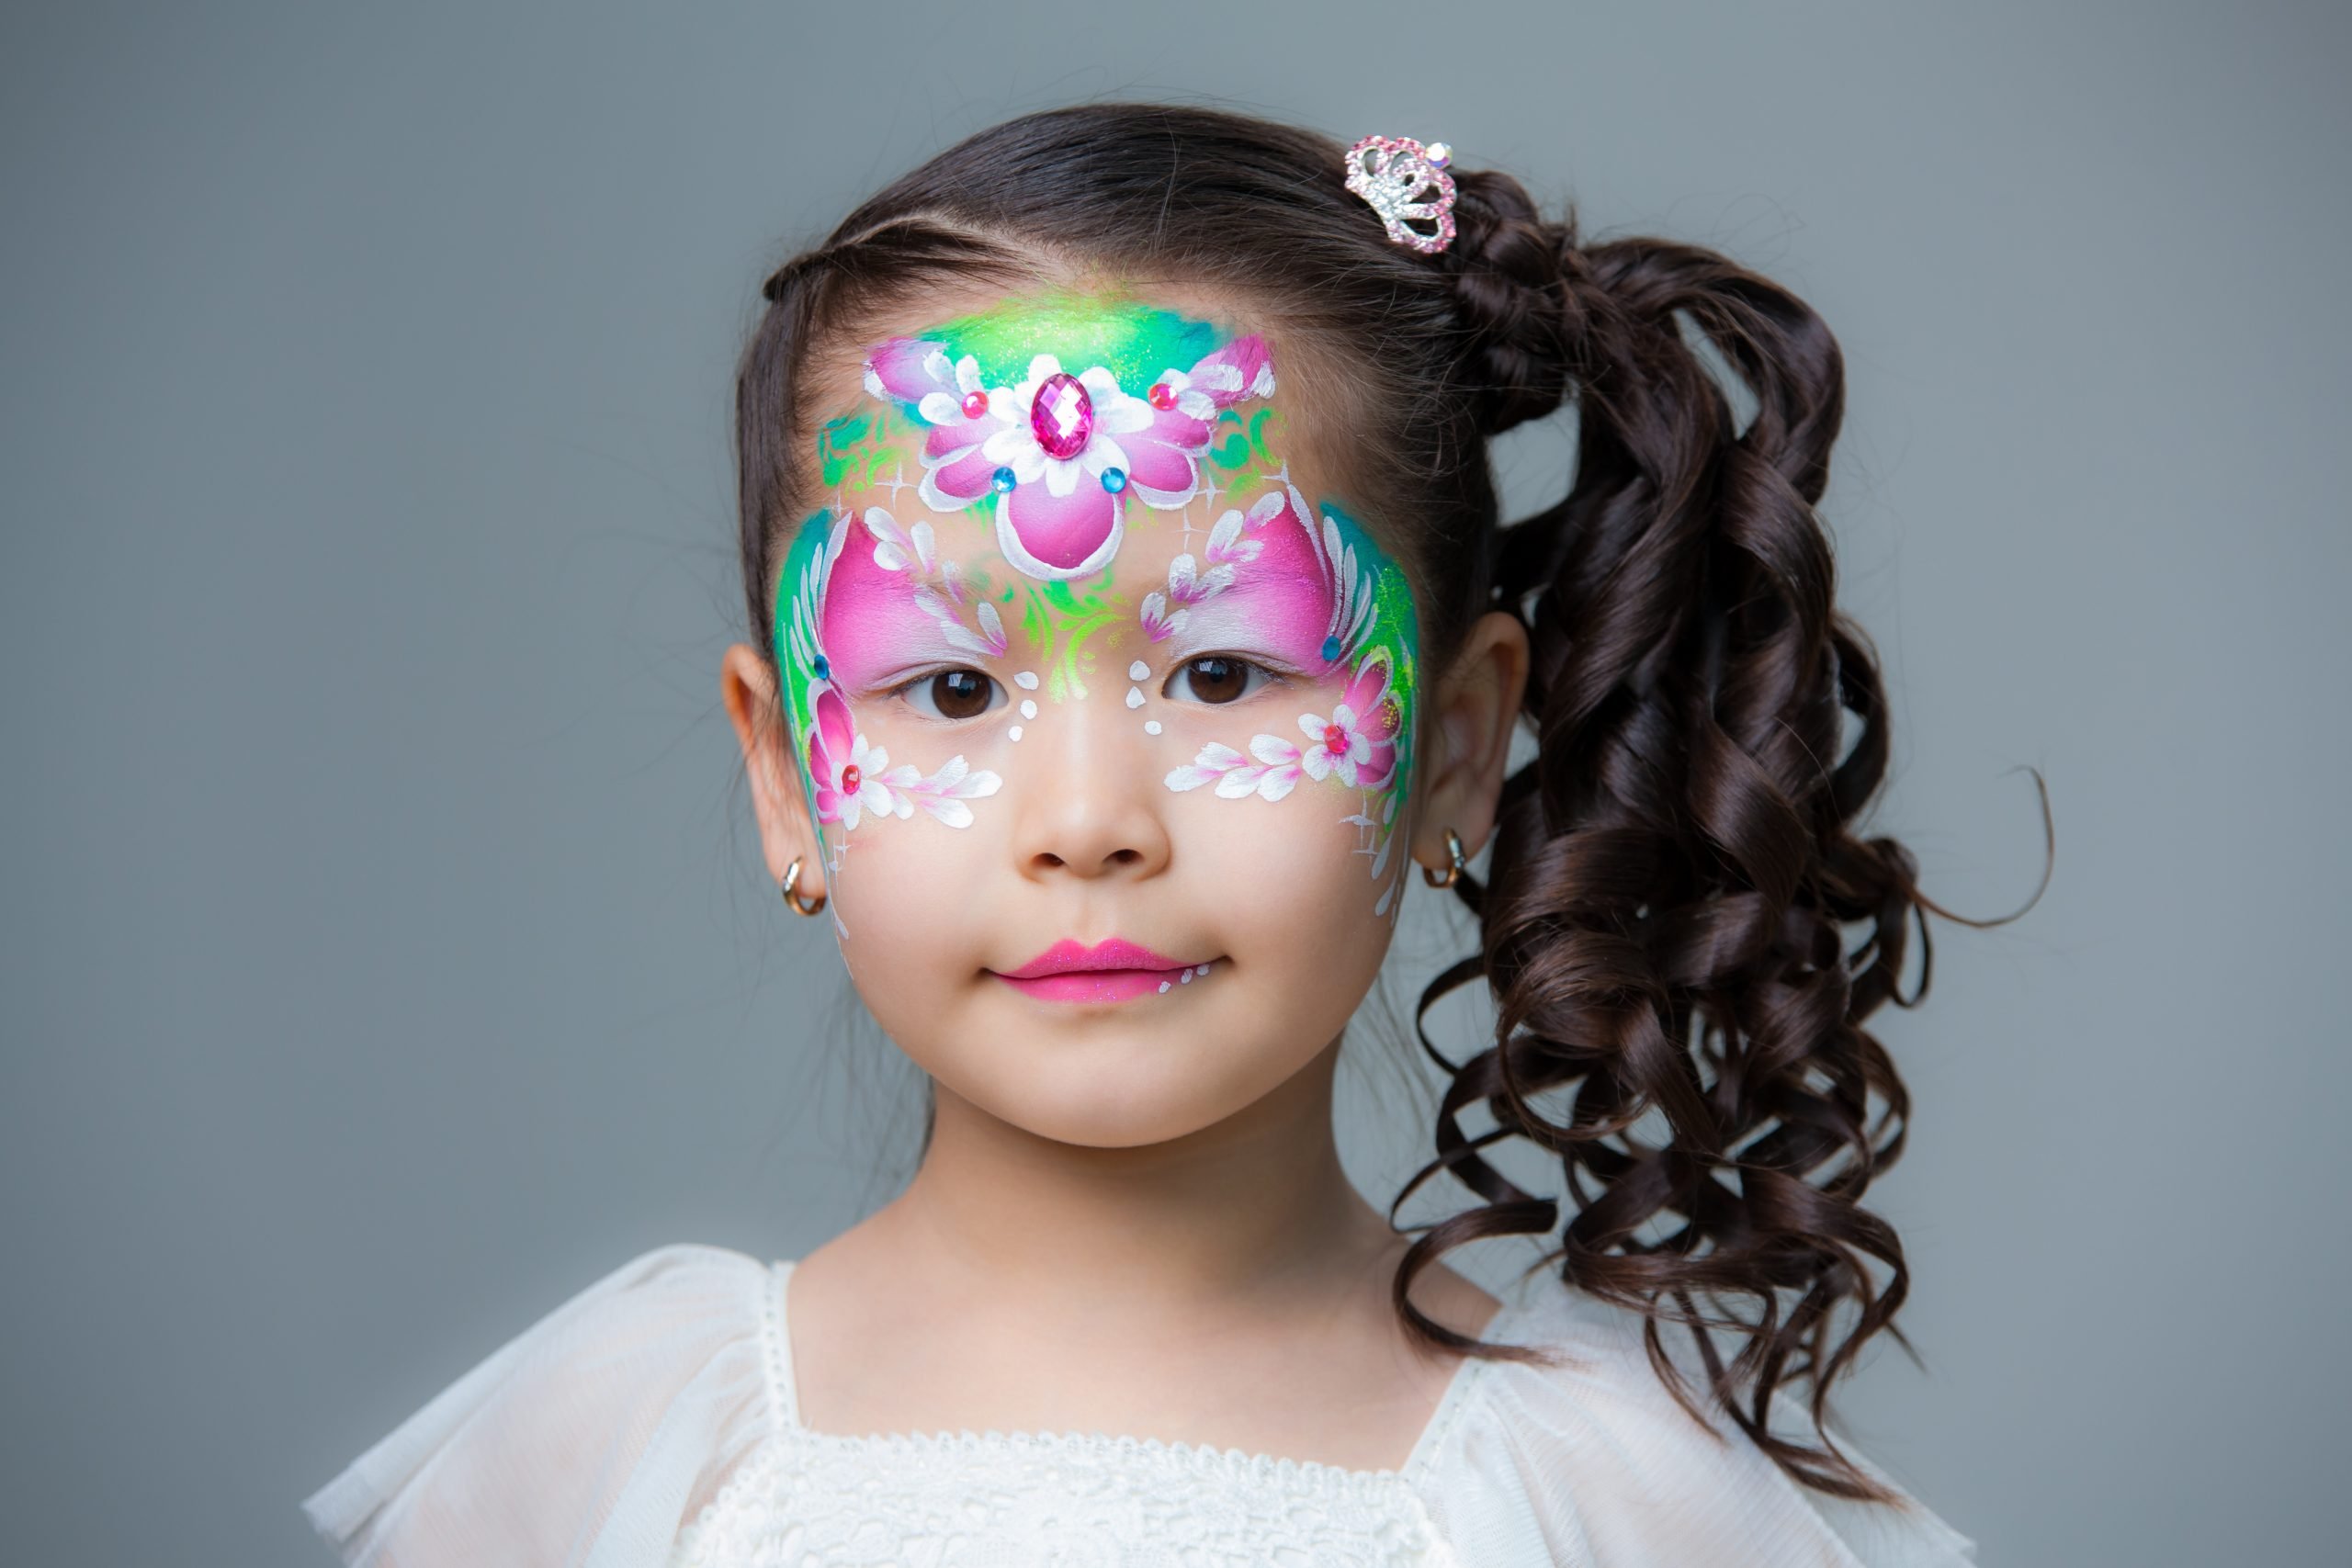 Pretty face painting with purple and green flowers